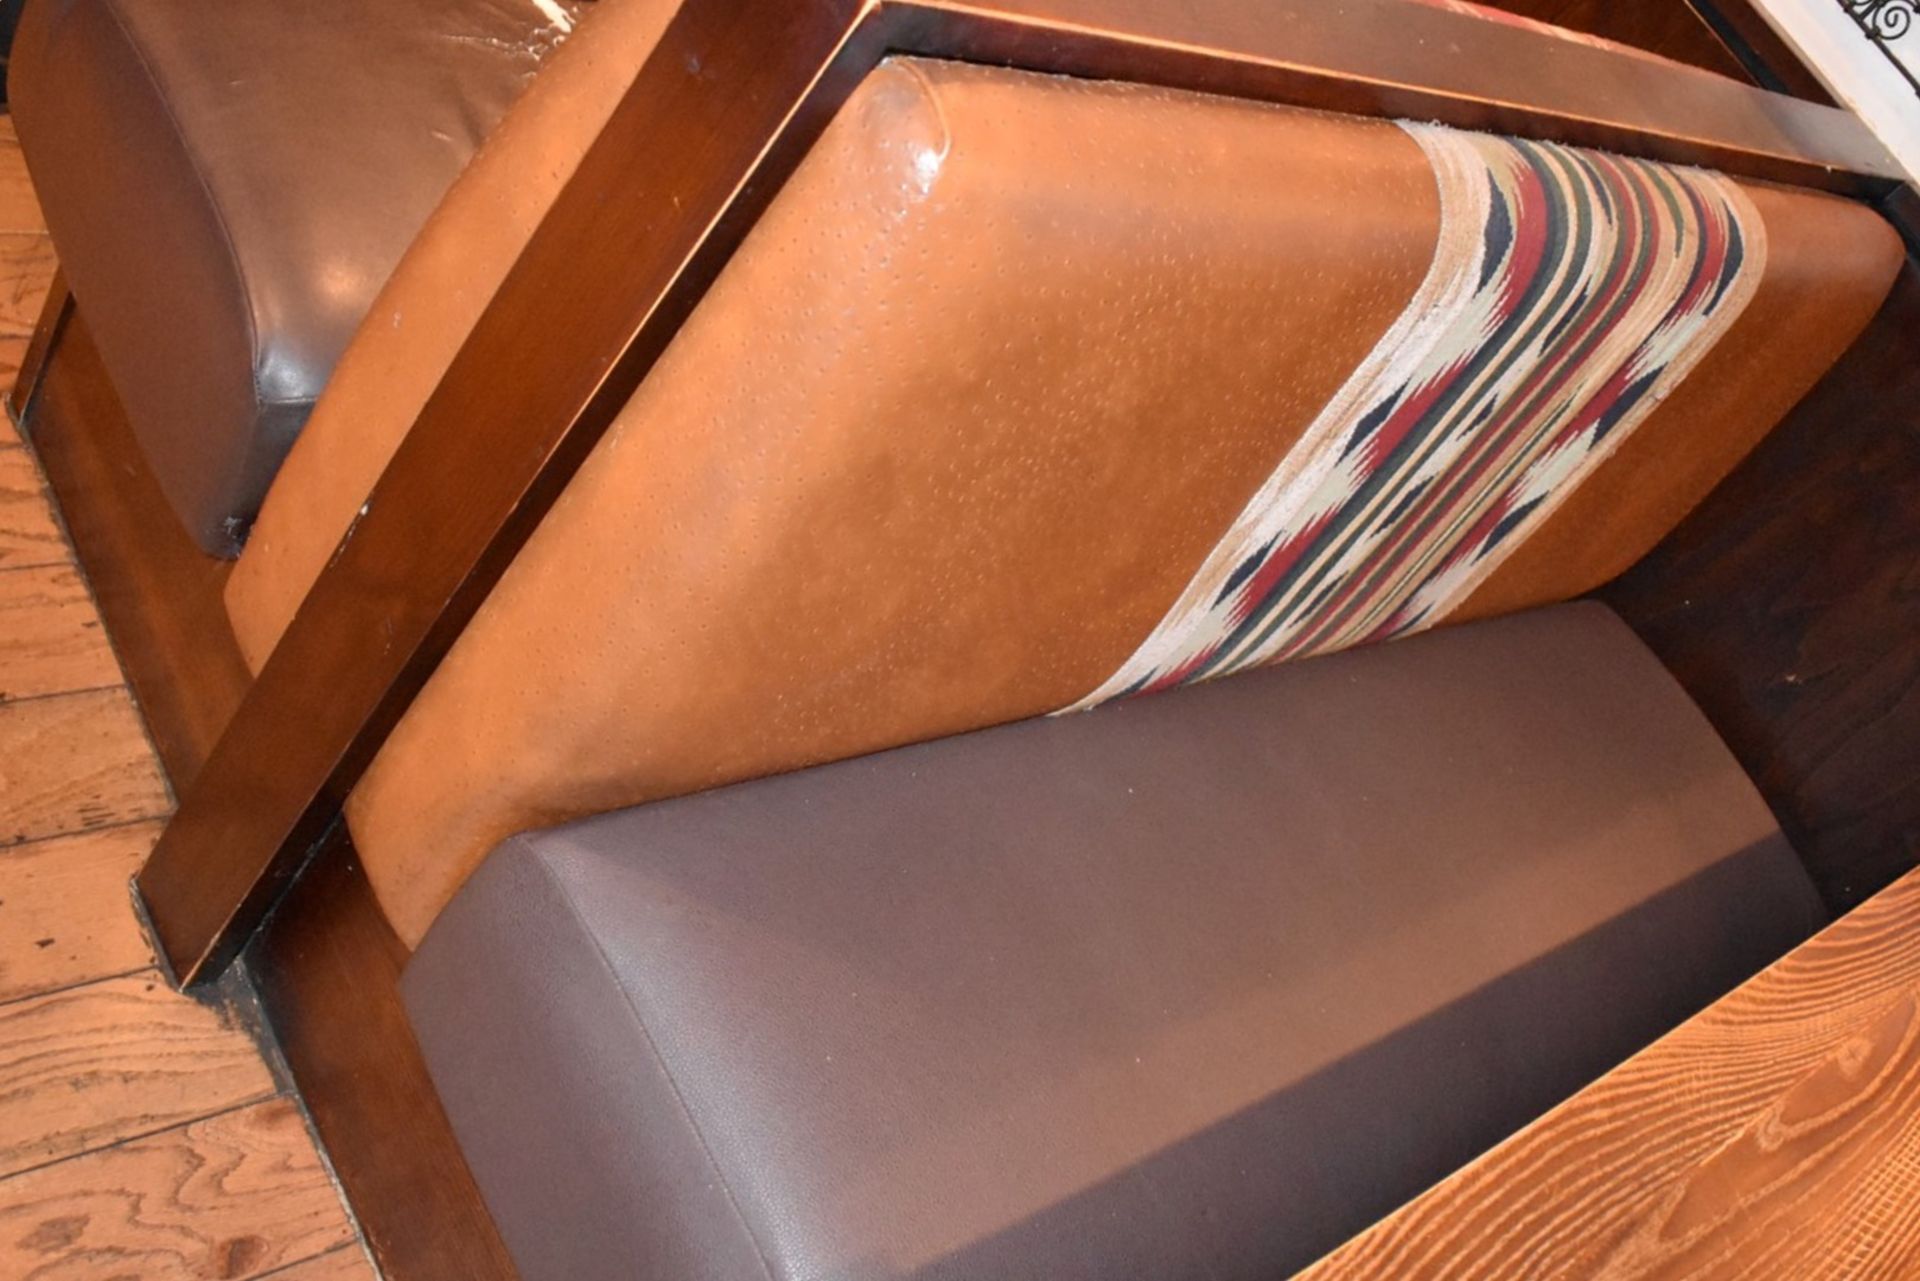 24 x Sections of Seating Booth With Fabric Backs and Faux Leather Seats - Image 5 of 34